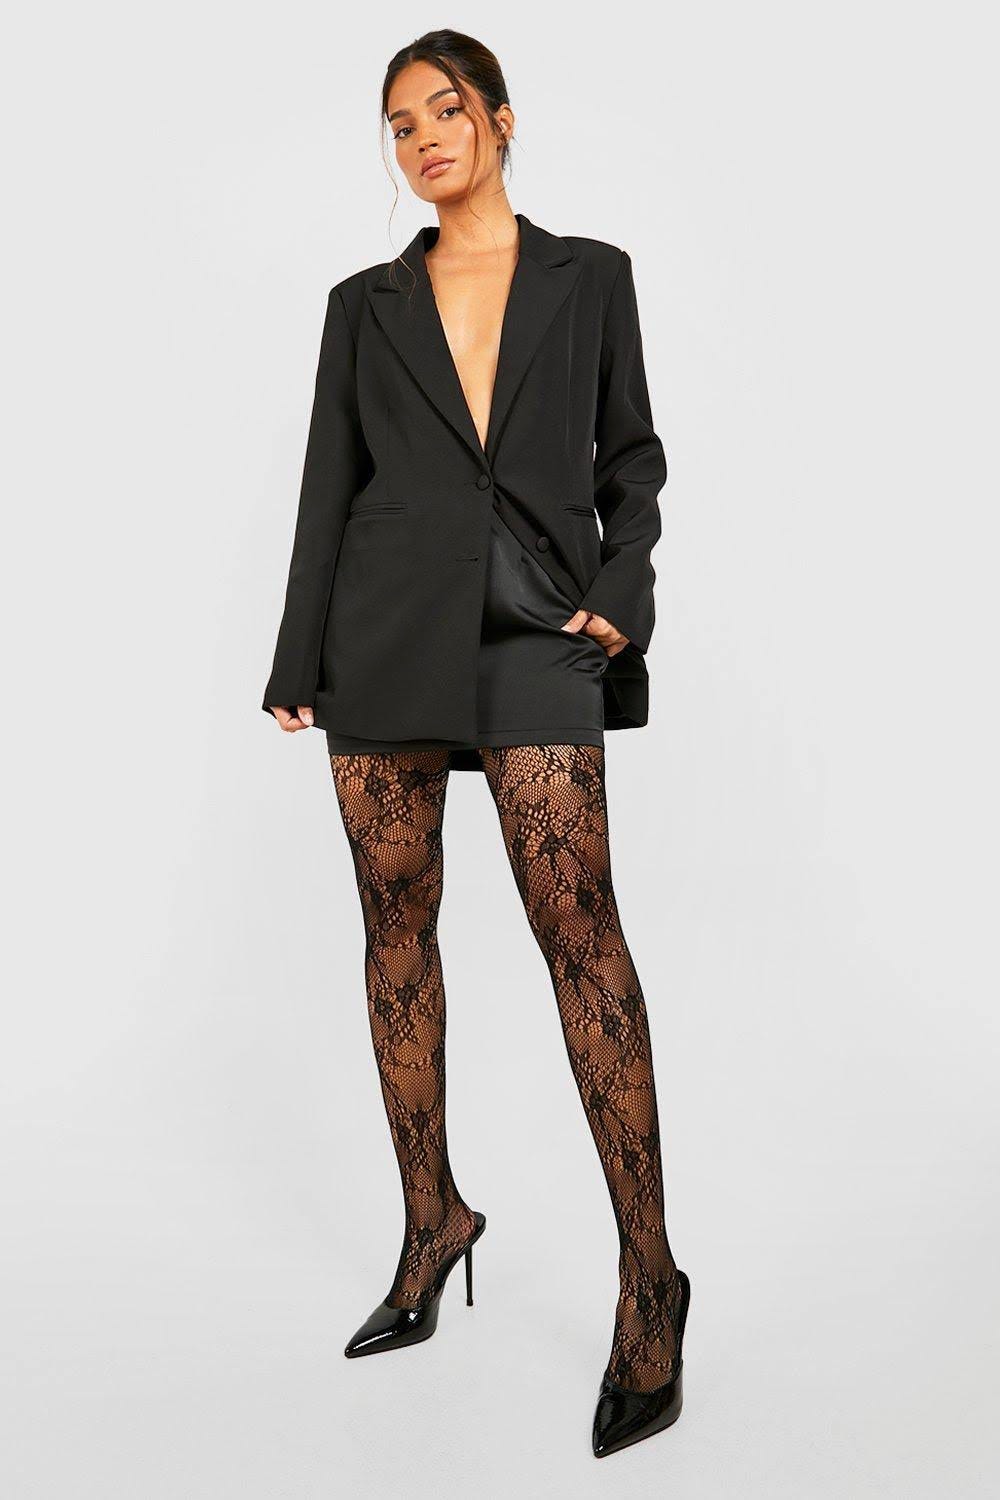 Black Lace Detail Fishnet Tights - One Size | Image